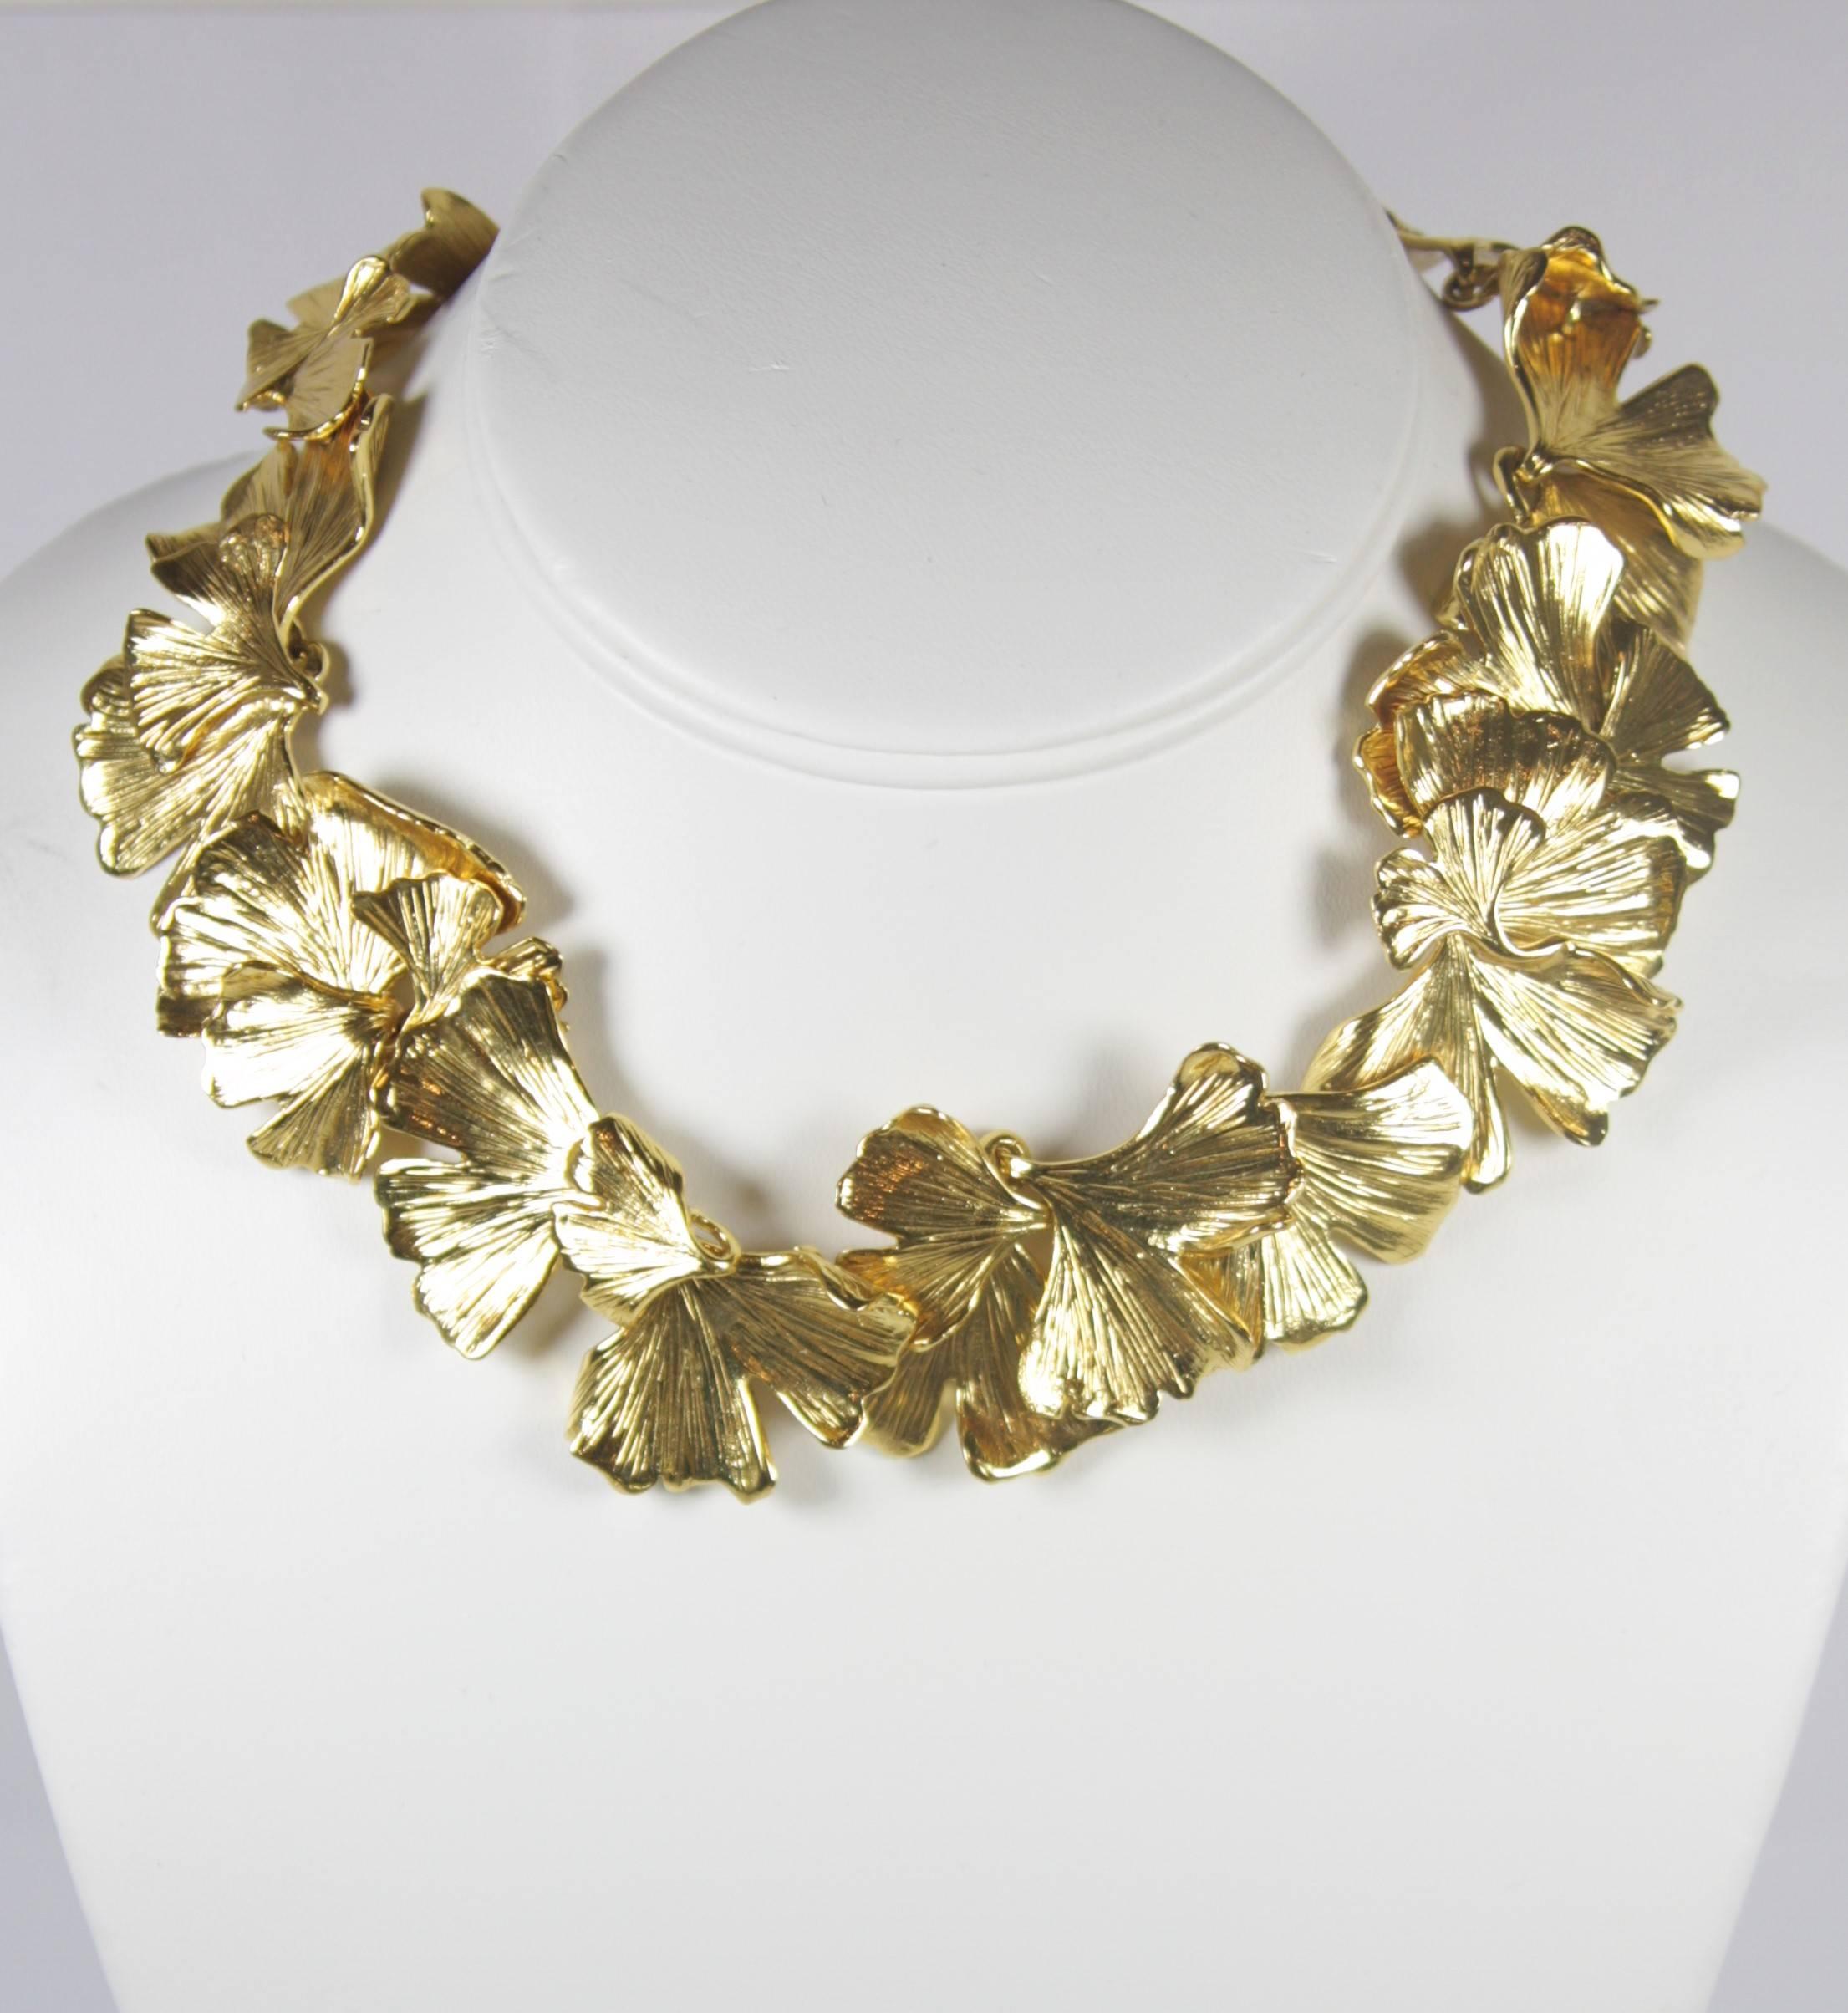  This necklace is composed of an 18kt gold plated leaf design. A lovely piece in excellent vintage condition. 

  **Please cross-reference measurements for personal accuracy. 

Measures (Approximately)
Length: 14.5